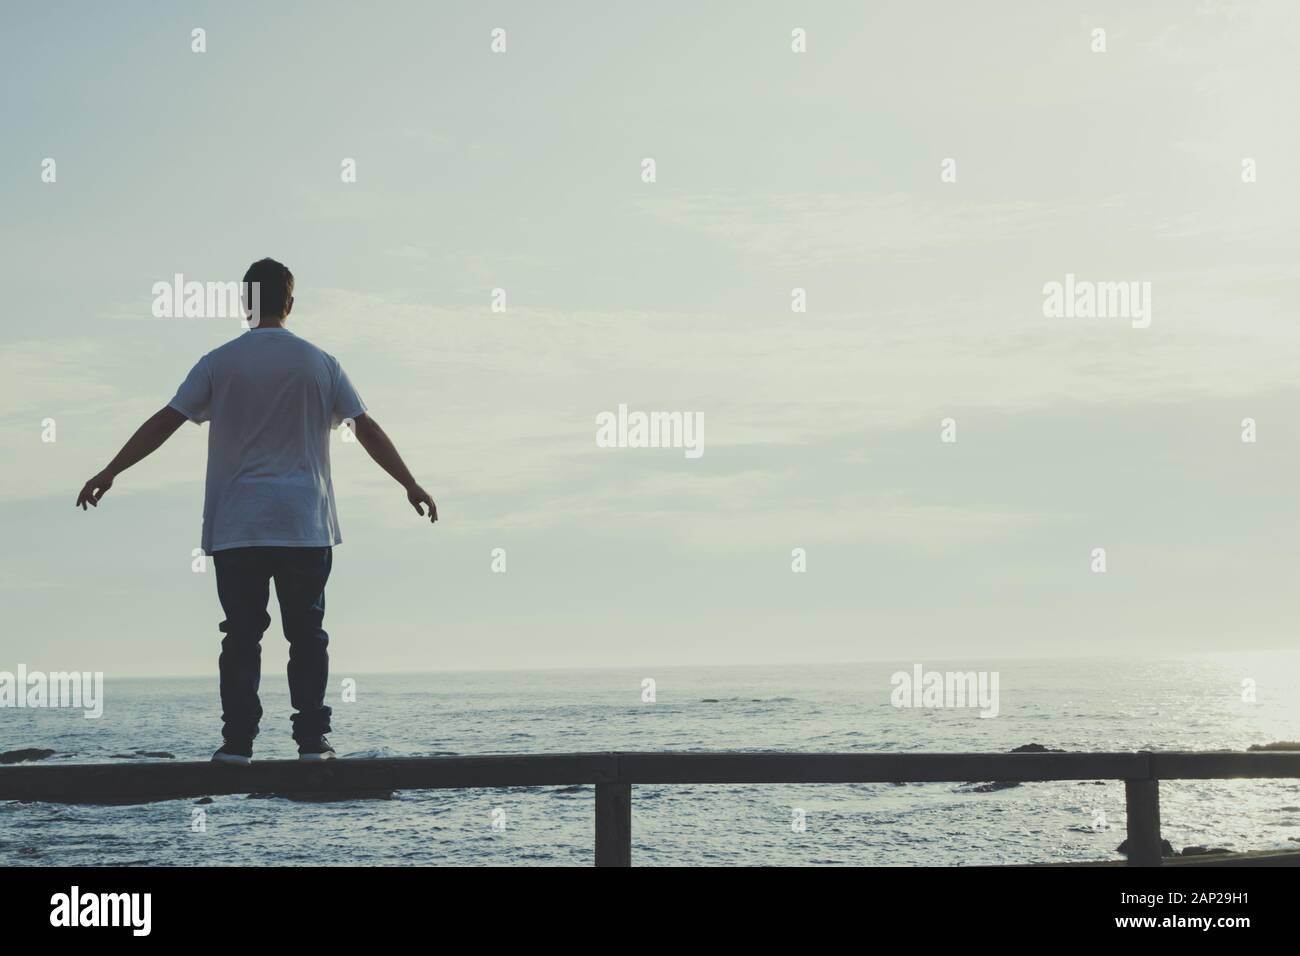 Man with outstretched arms standing on a railing looking at the ocean Stock Photo